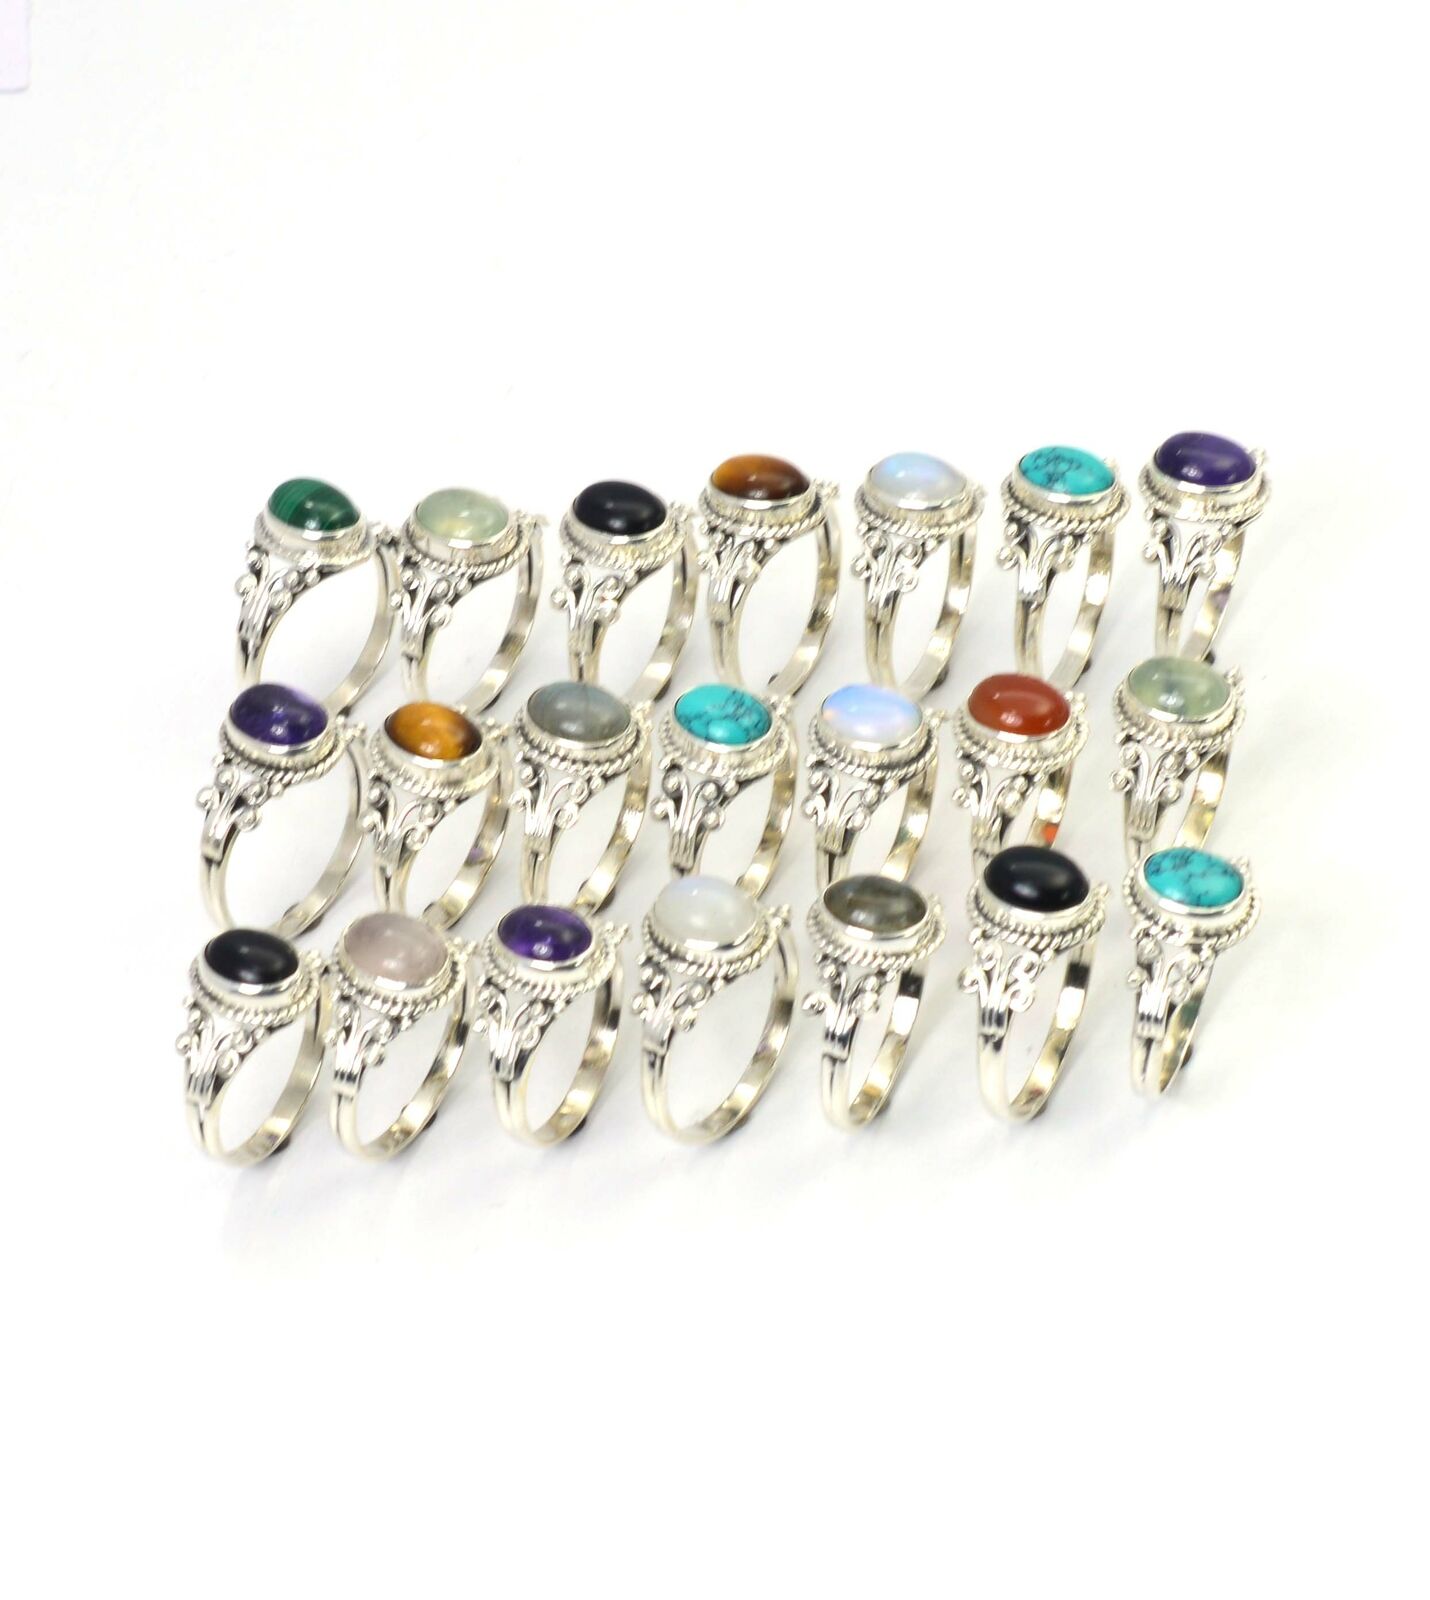 Wholesale 21pc 925 Solid Sterling Silver Purple Amethyst Mix Stone Ring Lot 1 F9